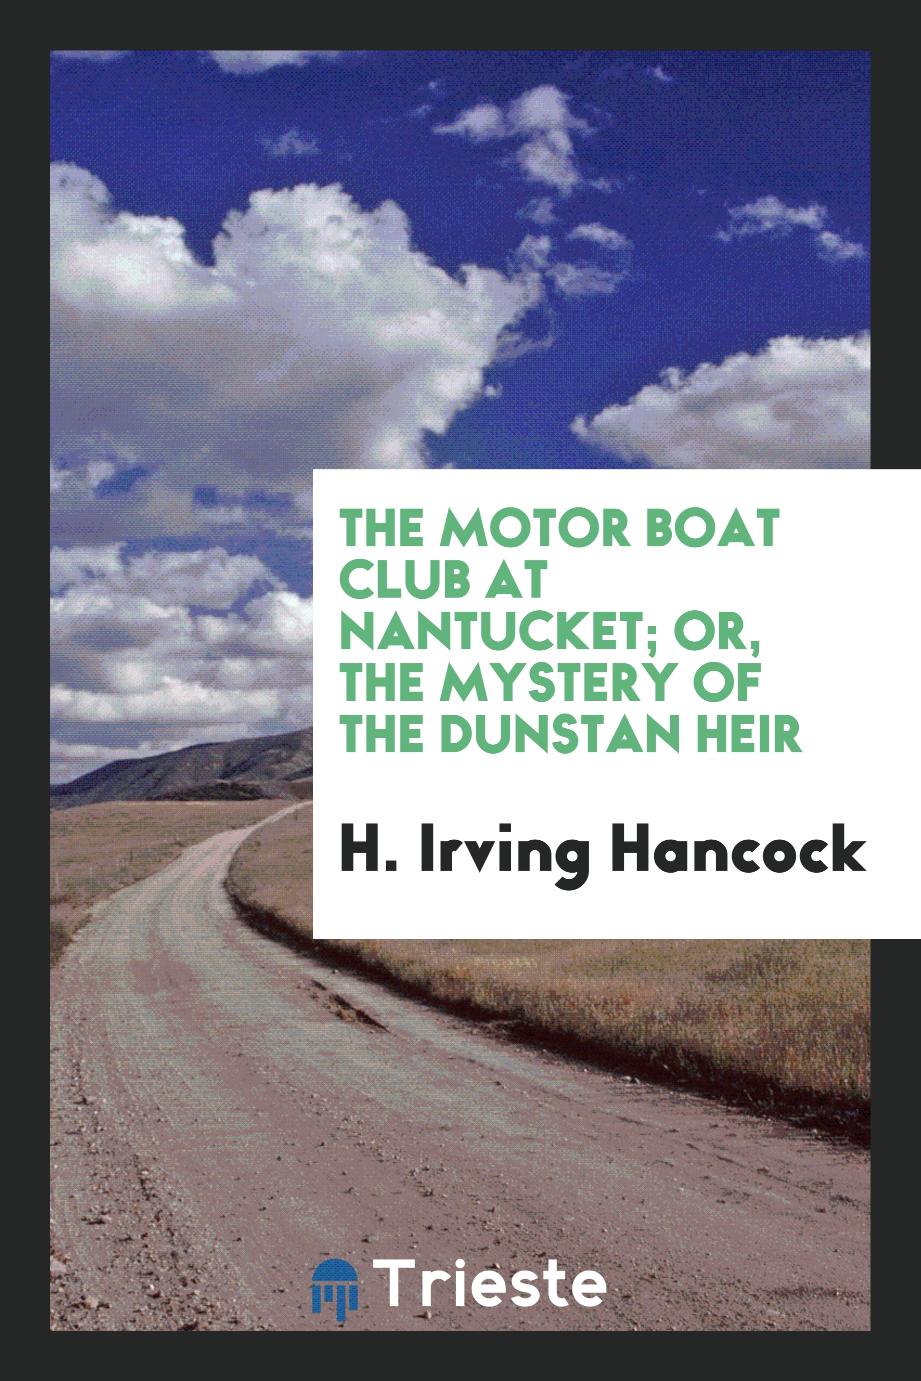 The motor boat club at Nantucket; or, The mystery of the Dunstan heir